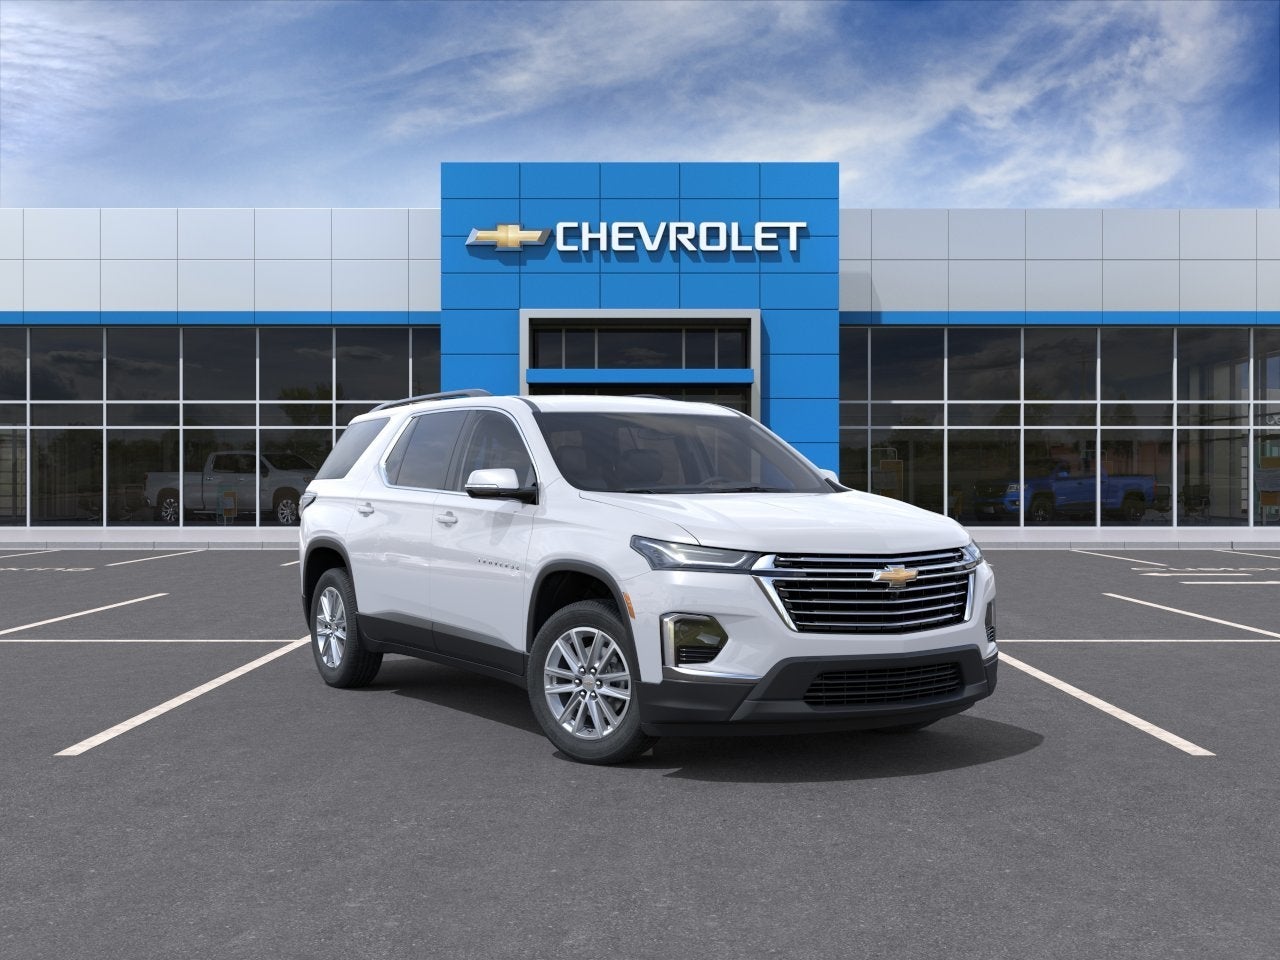 2023 Chevrolet Traverse LT Leather in Canton, CT | Hartford Chevrolet  Traverse | Davidson Chevrolet